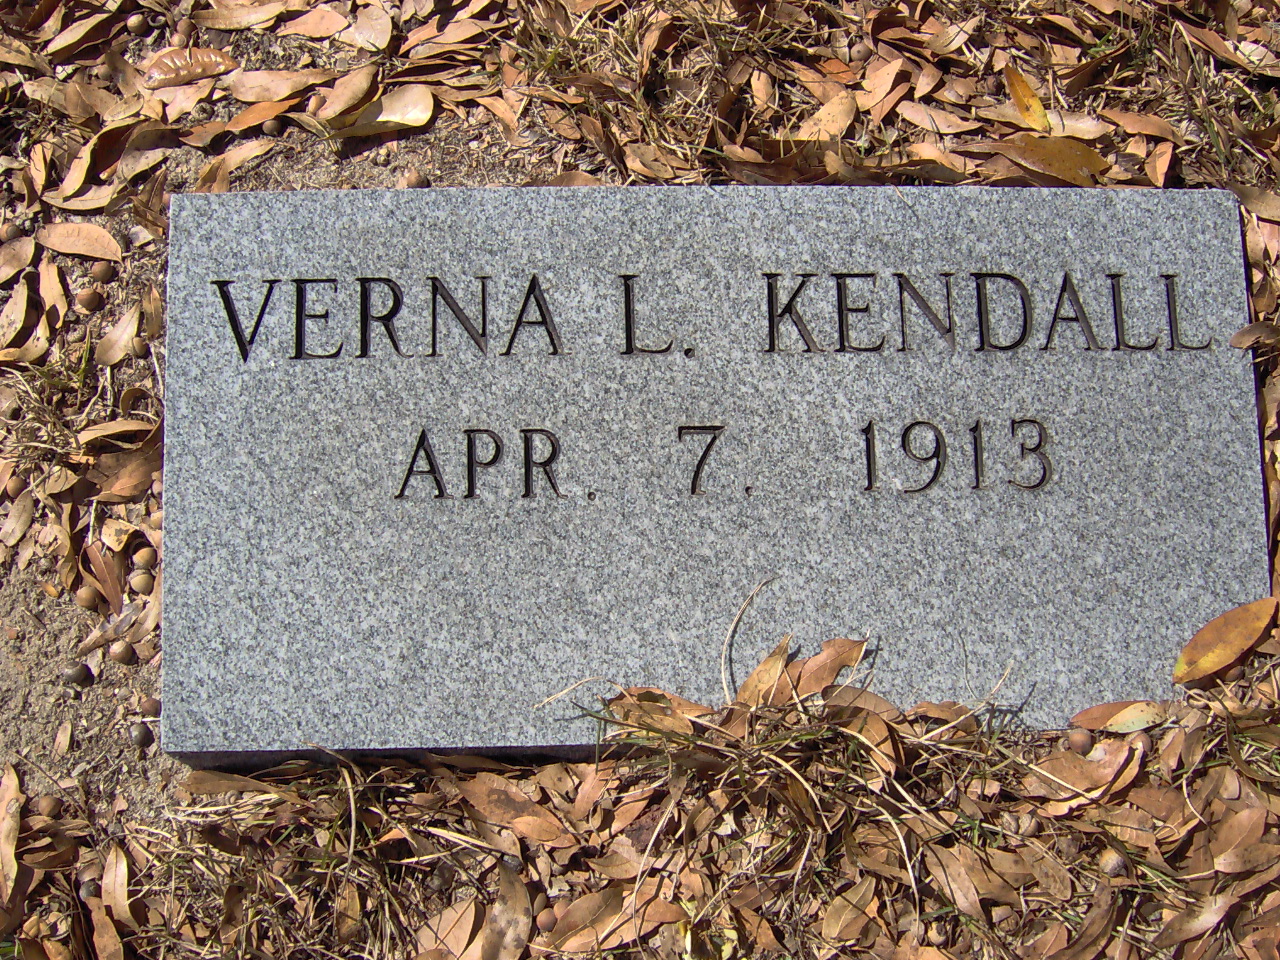 Headstone for Kendall, Verna L.